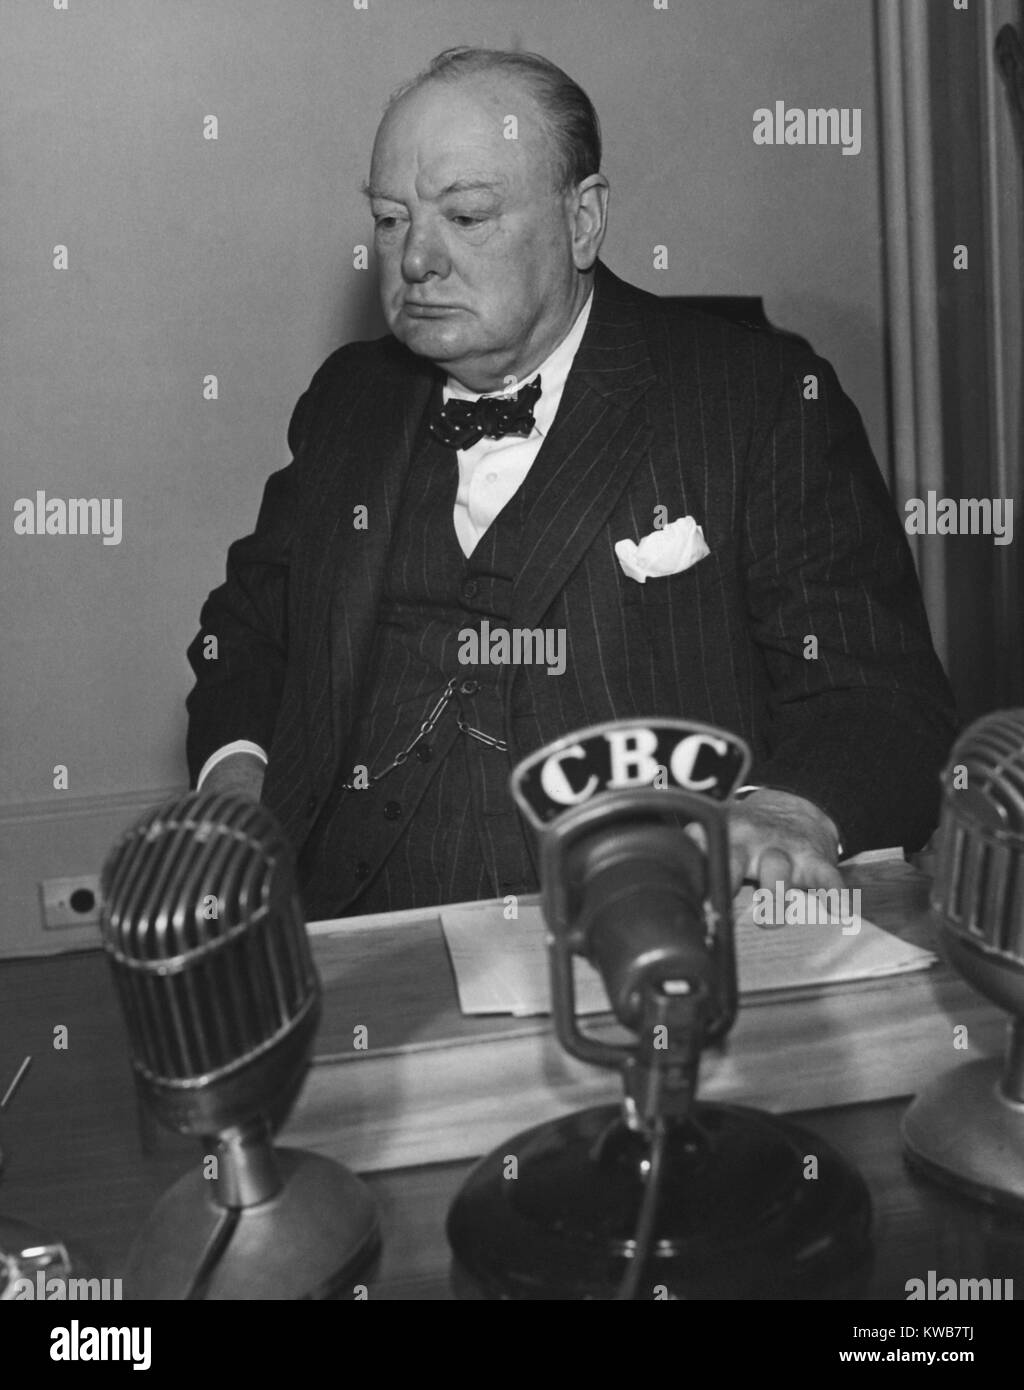 British Prime Minister Winston Churchill at the Quebec Conference, August 17-24, 1943. Key agenda items were the Normandy Invasion, Mediterranean theatre, European aerial bombing, and the development of the atomic bomb. World War 2. (BSLOC 2014 8 179) Stock Photo